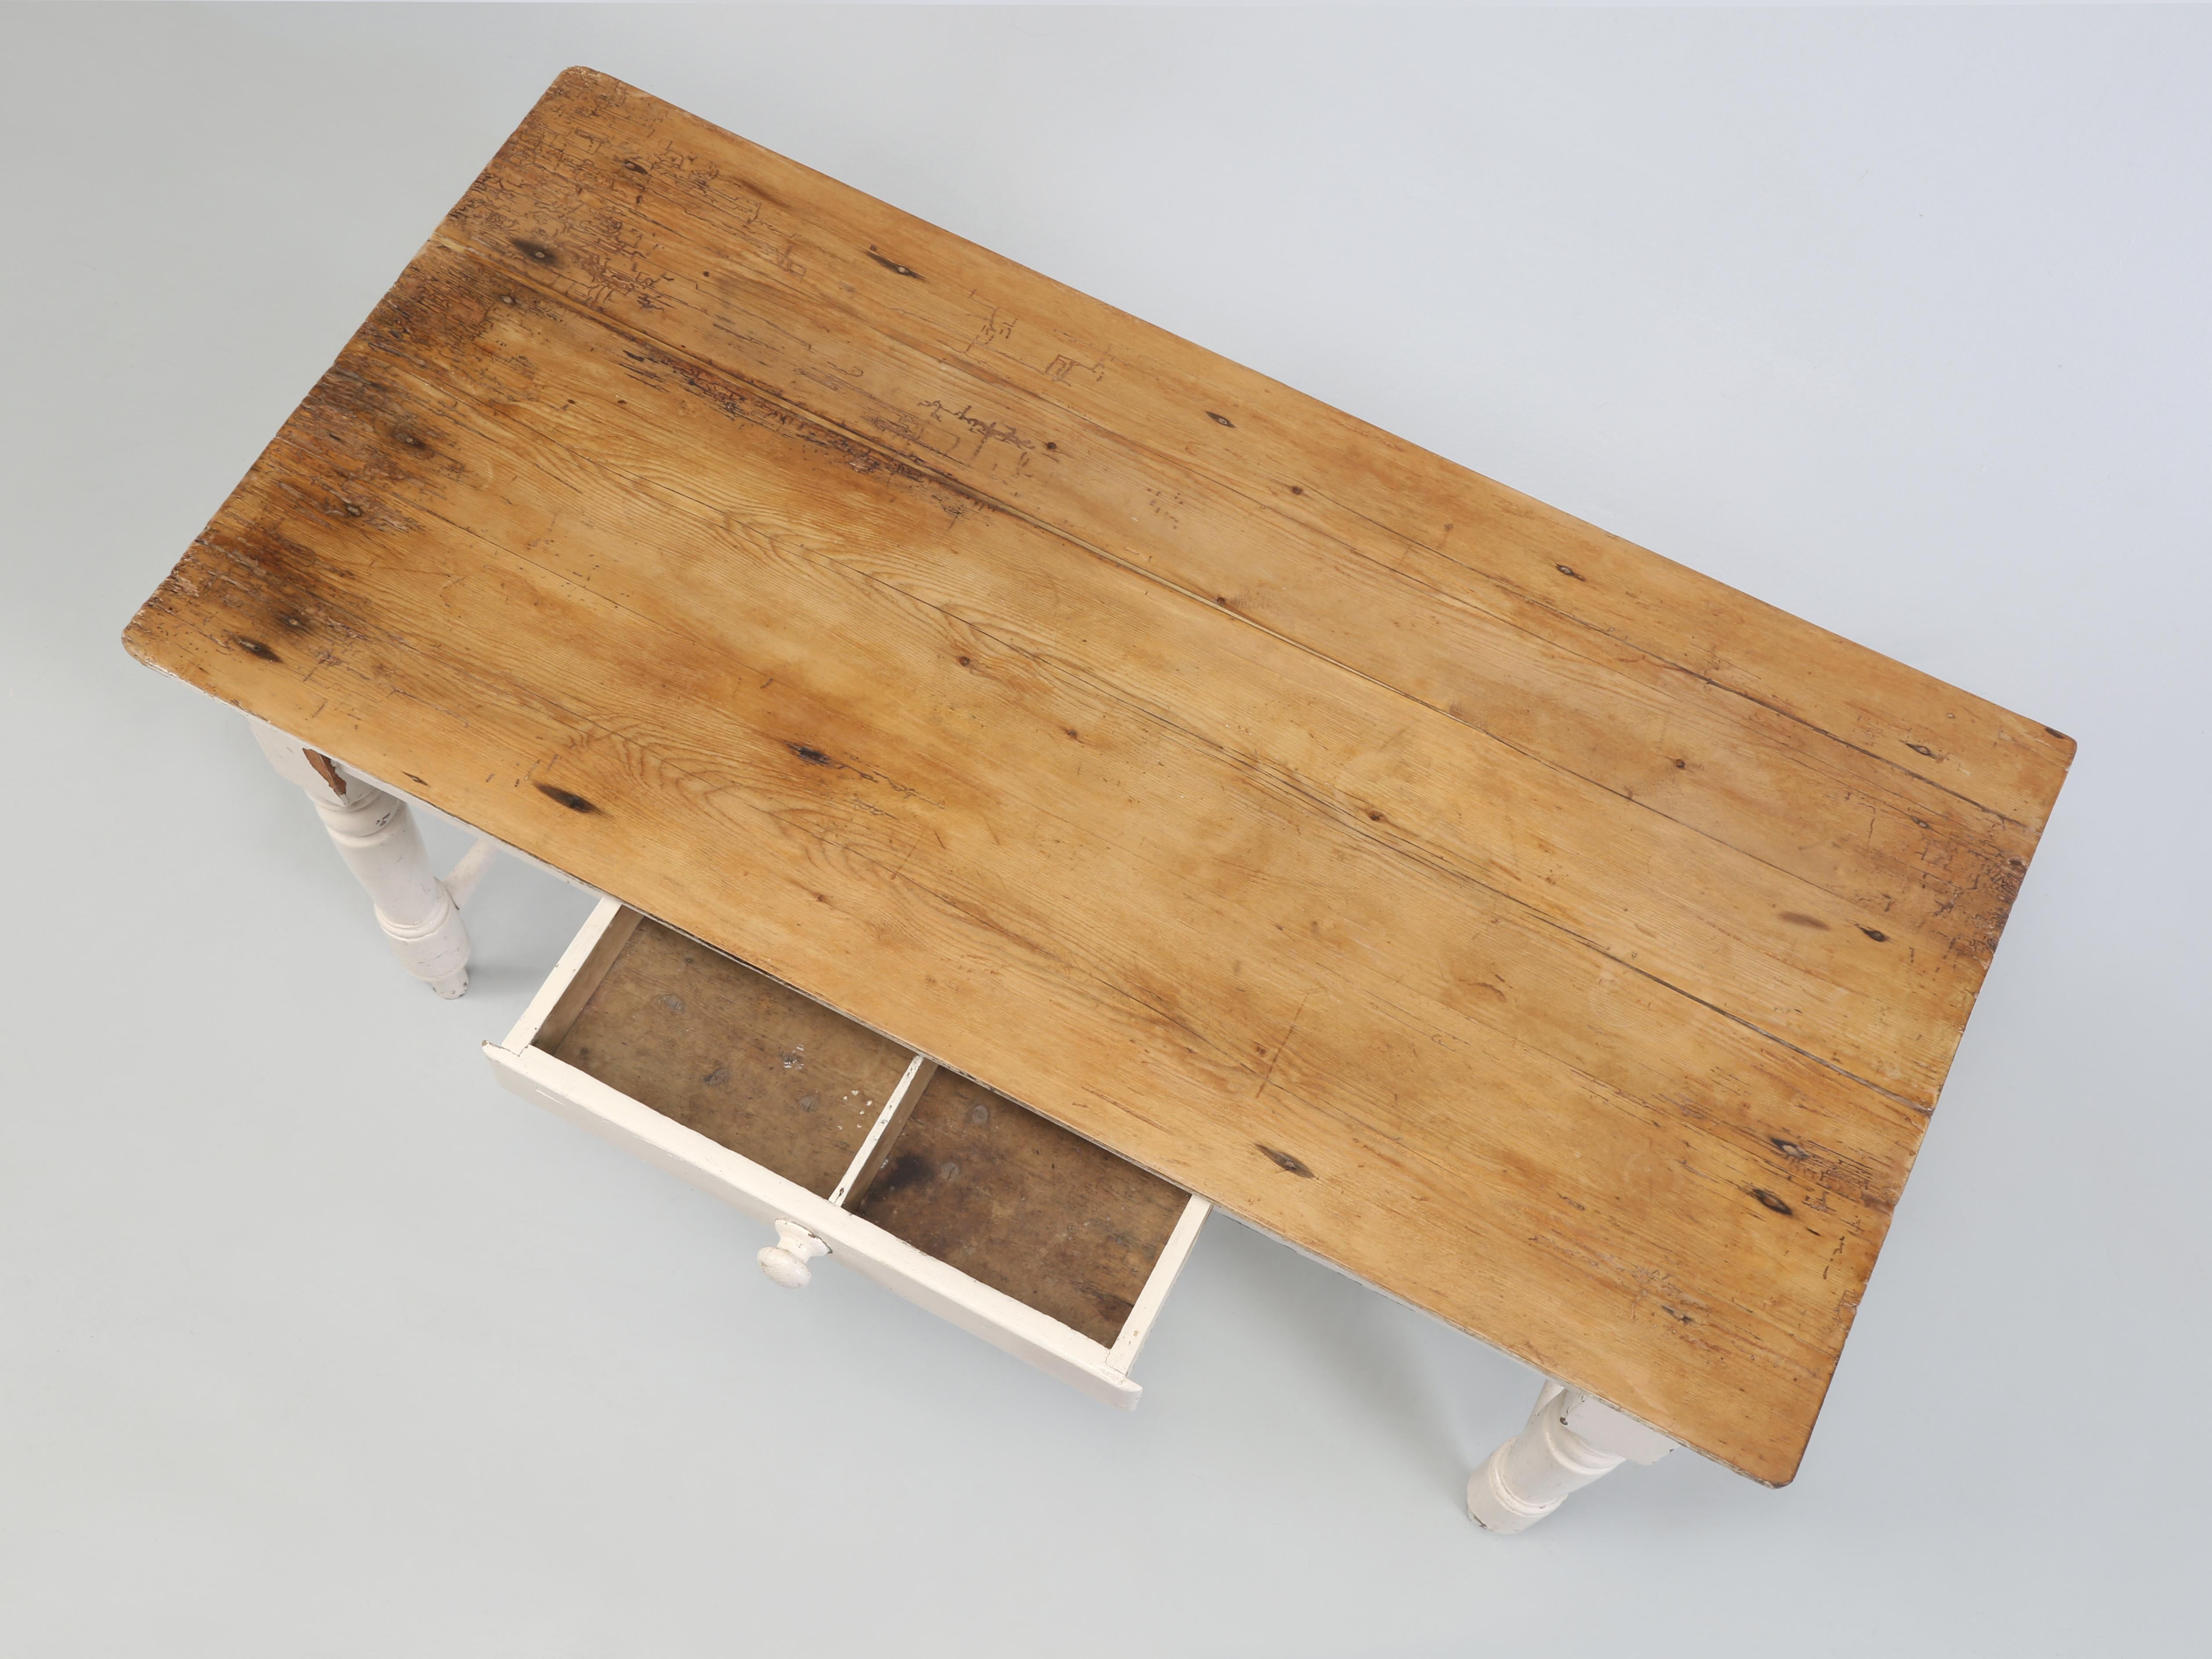 Antique Irish Pine Kitchen Table dating from around 1880-1890. The most interesting aspect of our Antique Irish Pine Small Table is the Patina of the Scrubbed Pine Top. Try as we might, there is simply no way to duplicate a real 100-year-old patina.